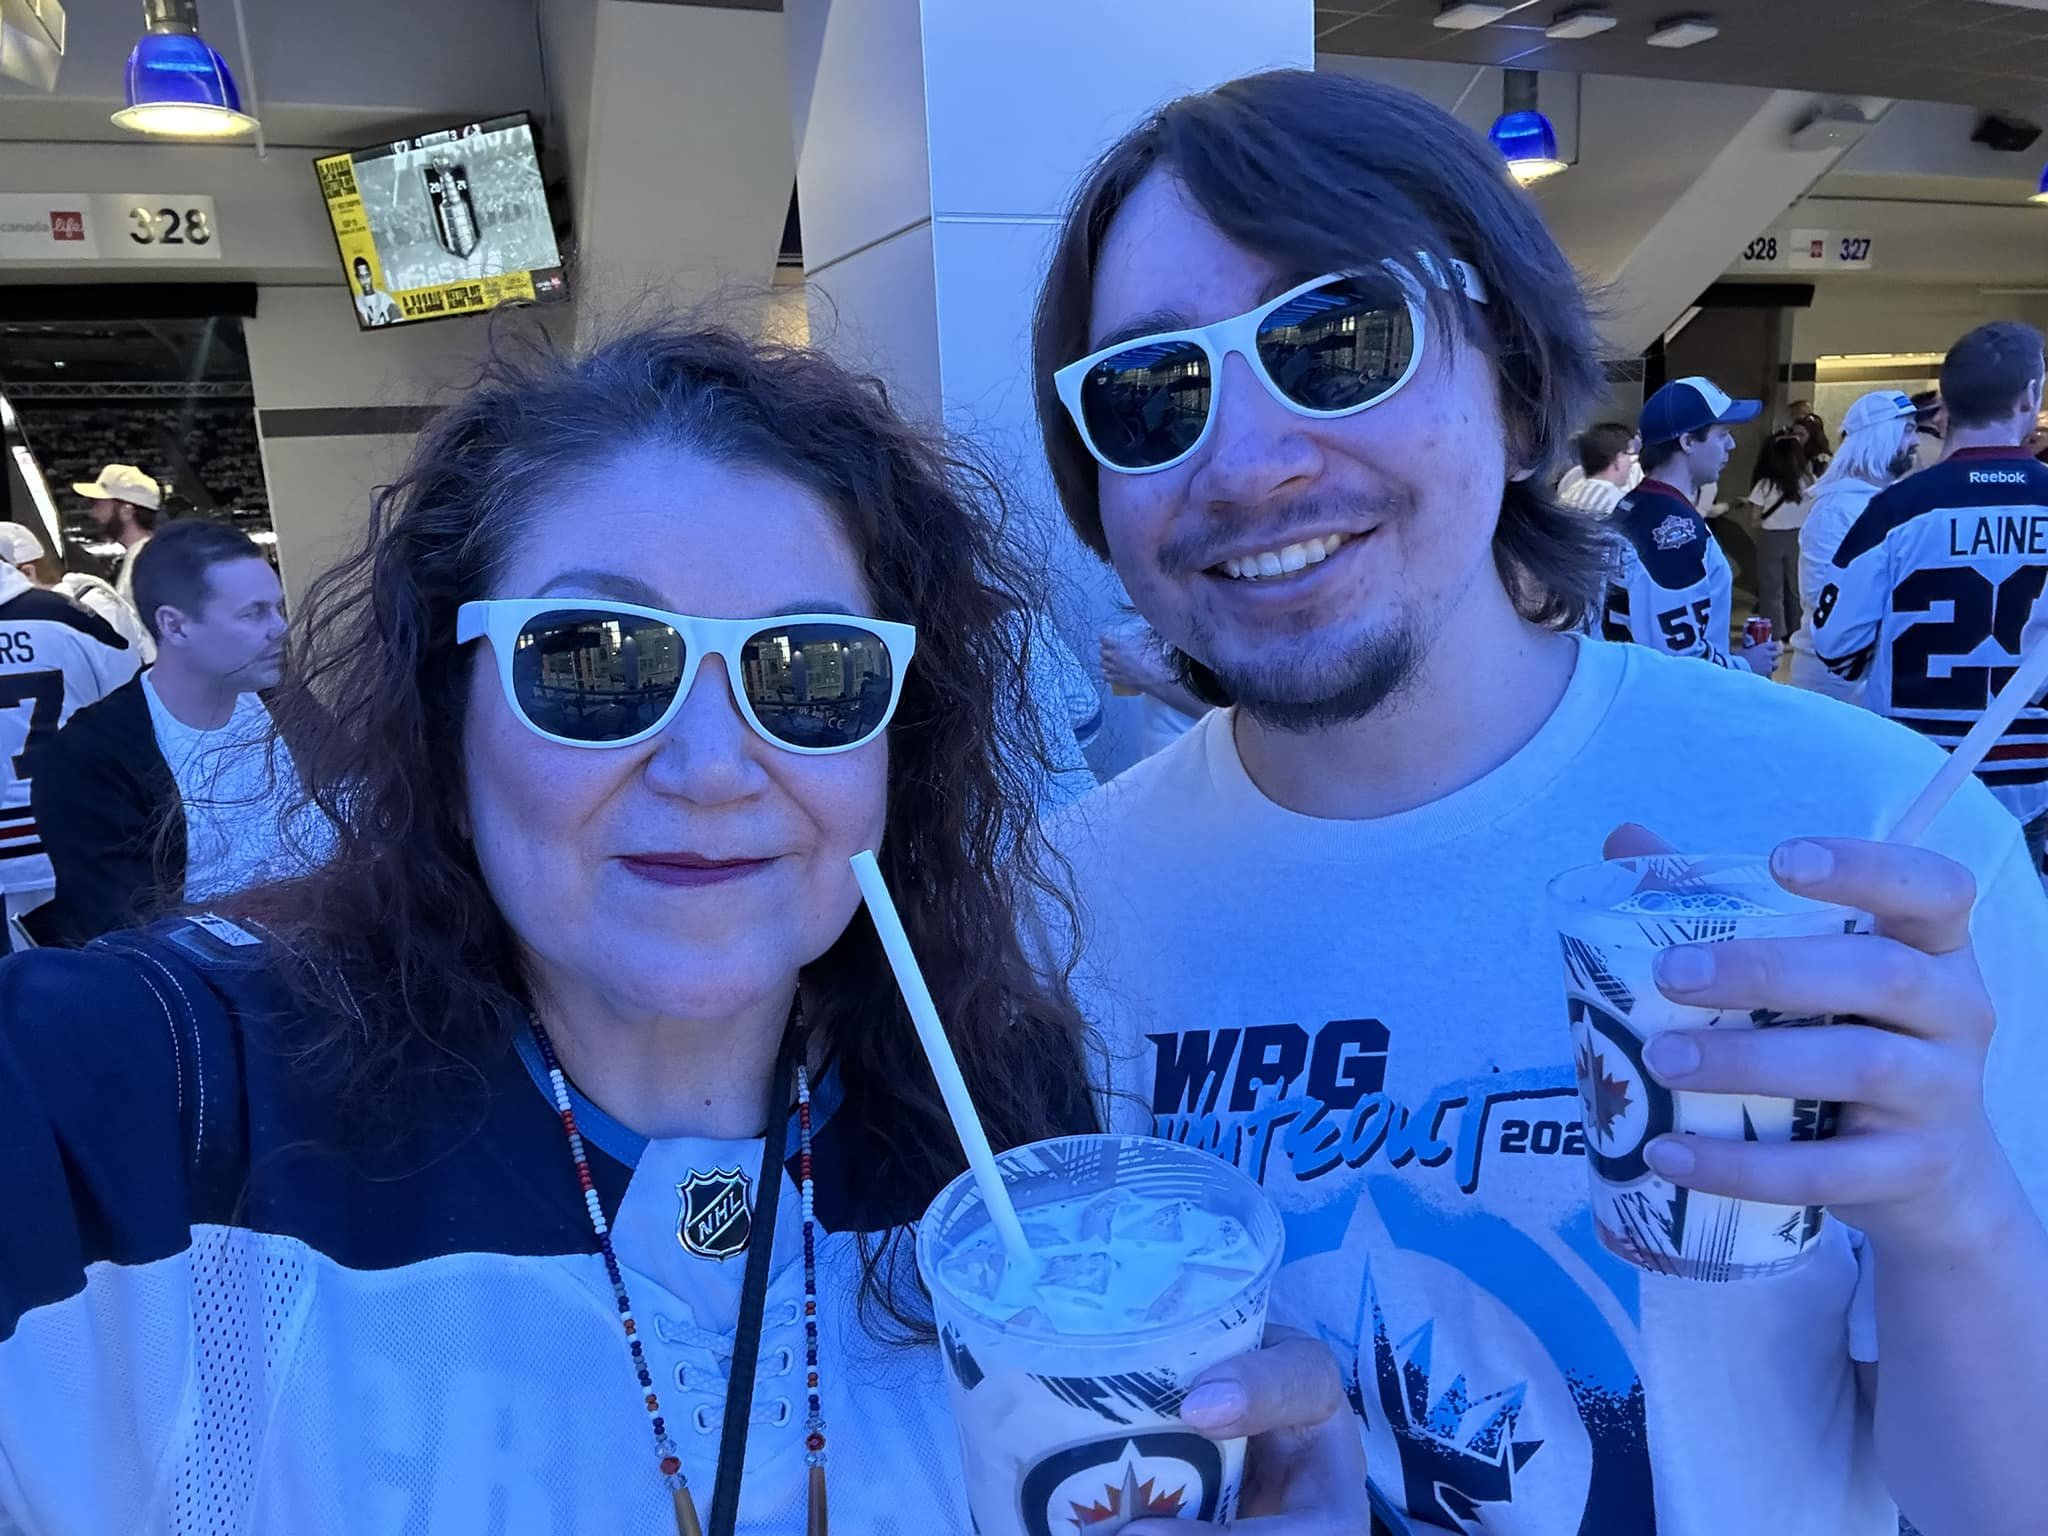 White out and white out cocktails!! Winnipeg Jets baby!!!